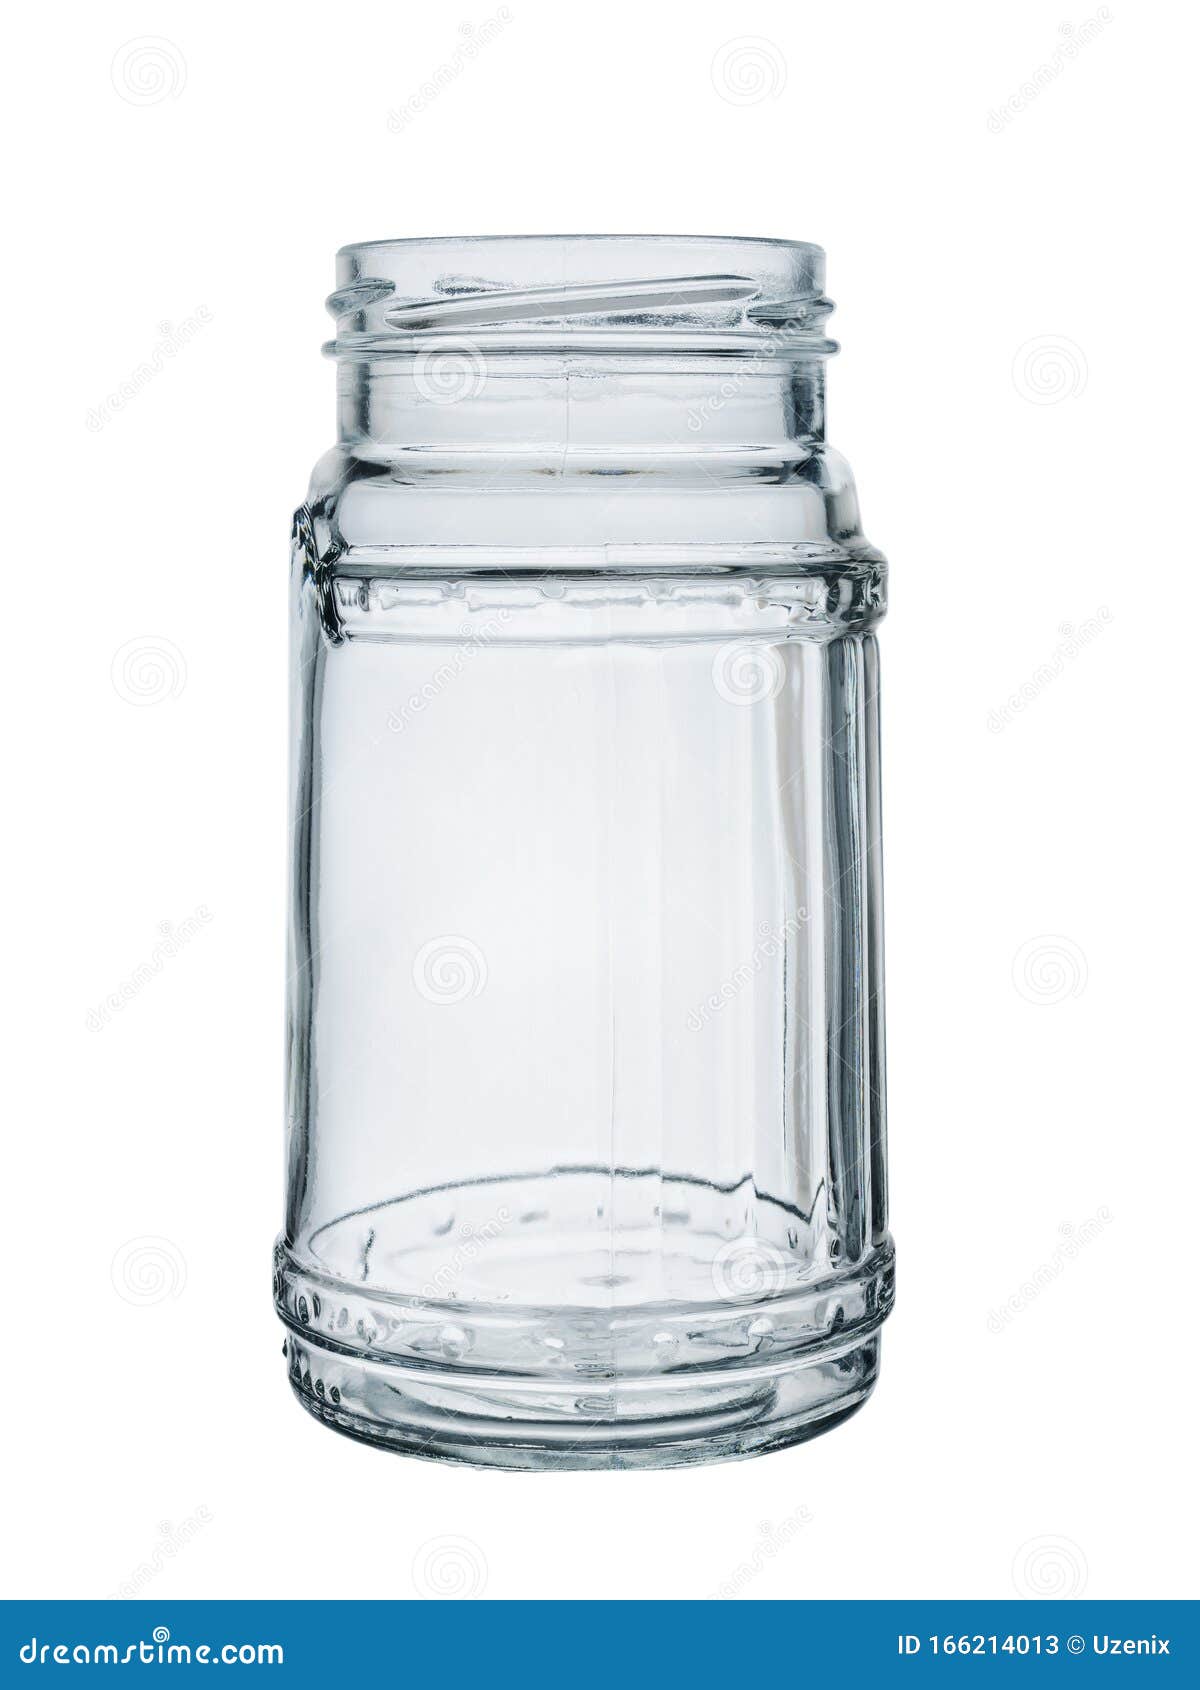 https://thumbs.dreamstime.com/z/empty-glass-jar-no-lid-isolated-white-background-empty-glass-jar-no-lid-isolated-white-background-166214013.jpg